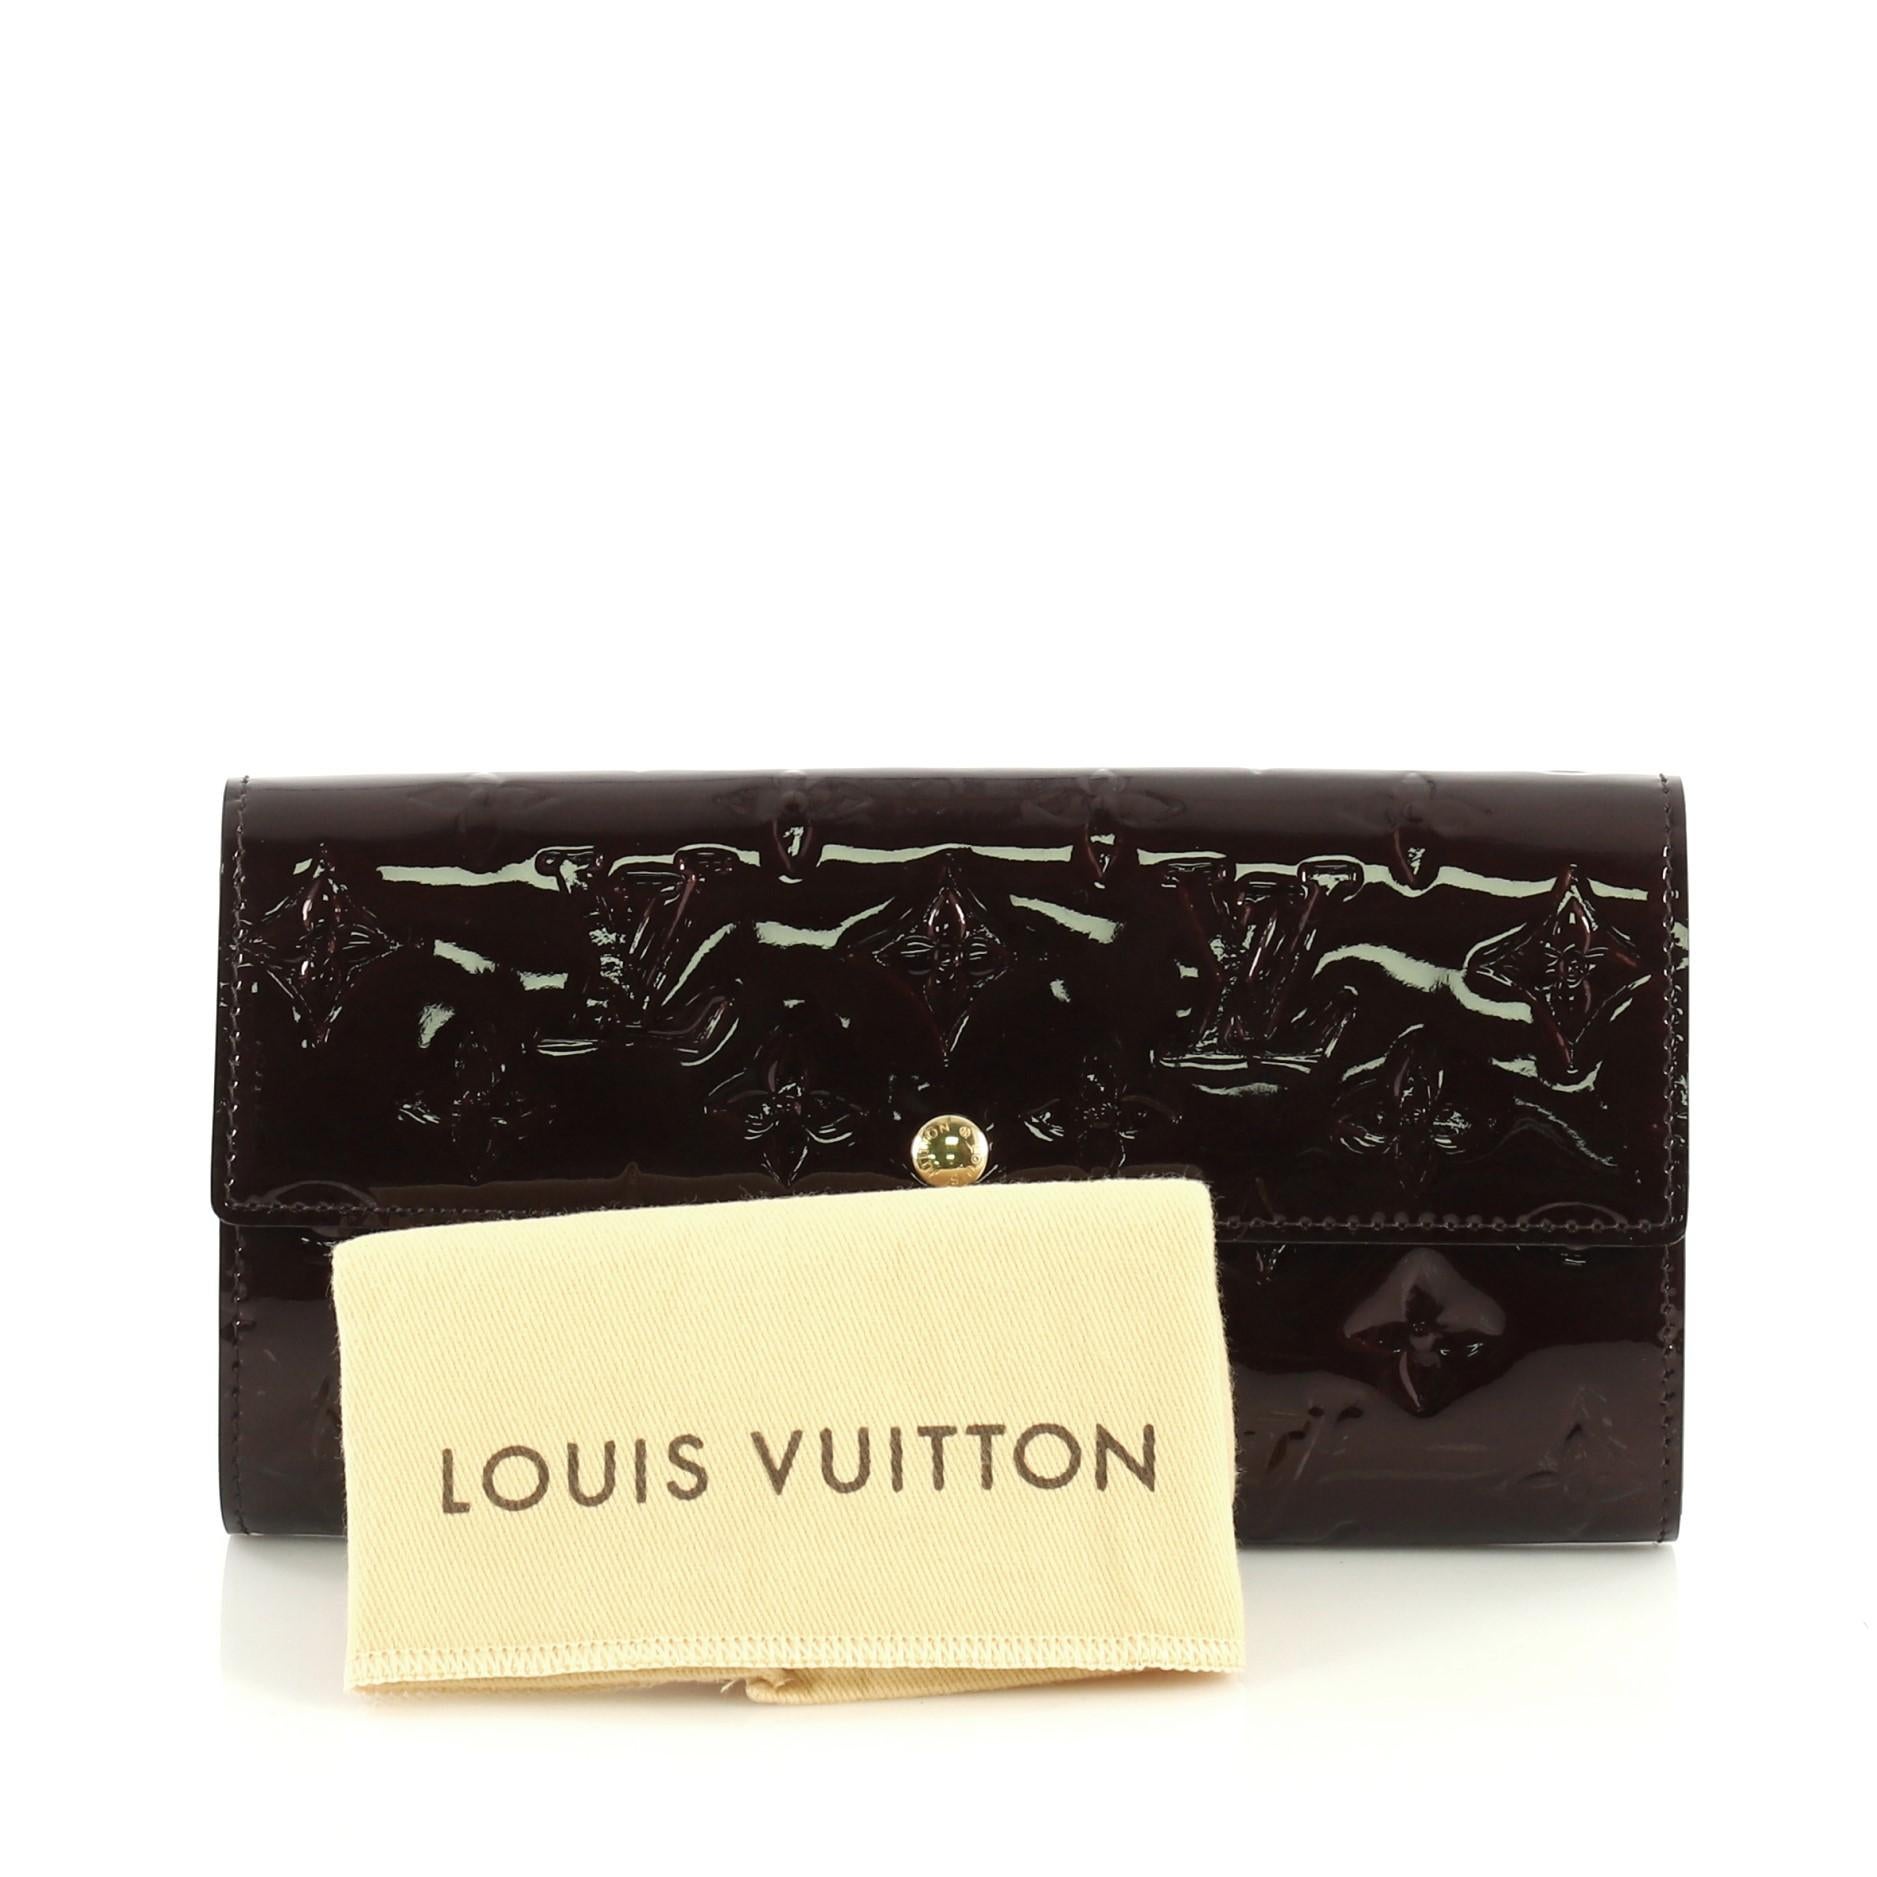 This Louis Vuitton Sarah Wallet Monogram Vernis, crafted in red monogram vernis leather, features gold-tone hardware. Its snap button closure opens to a purple leather interior with multiple card slots and a middle zip compartment. Authenticity code